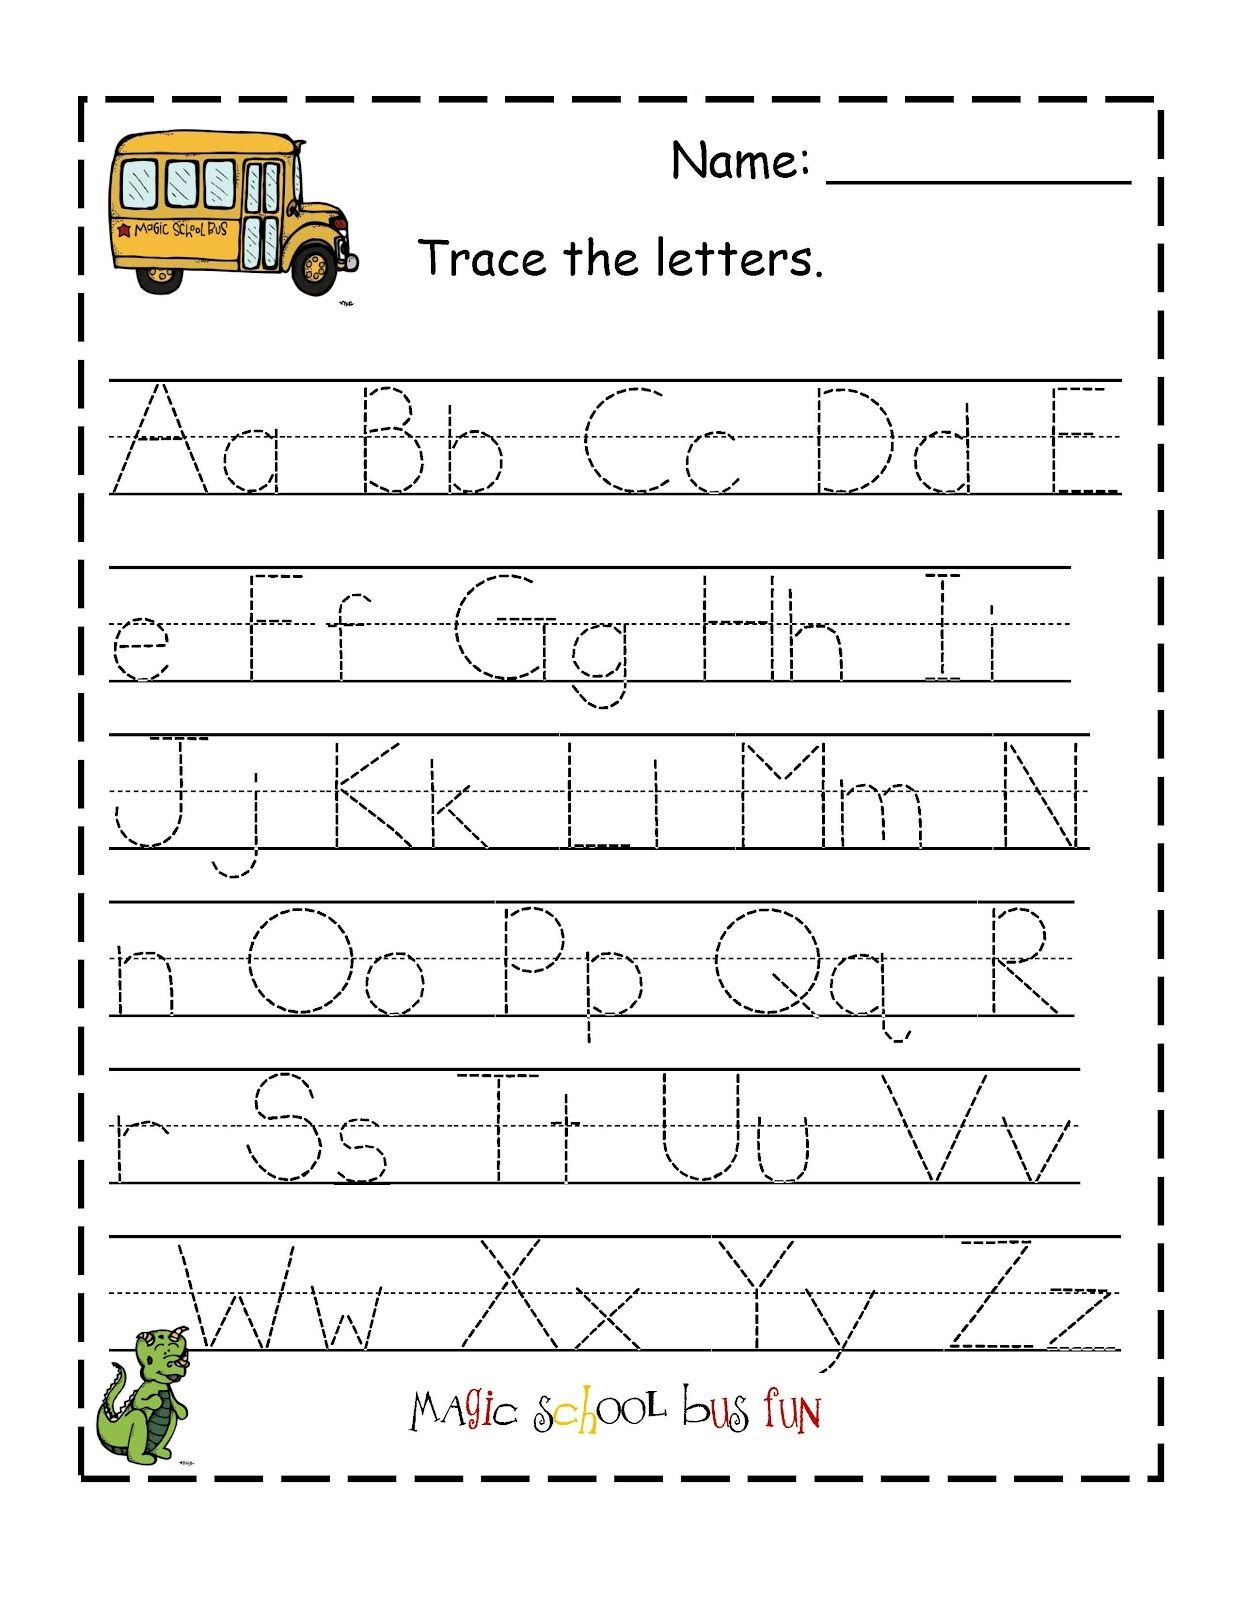 Traceable Letters Worksheet For Children Golden Age intended for Tracing Name Gabriel